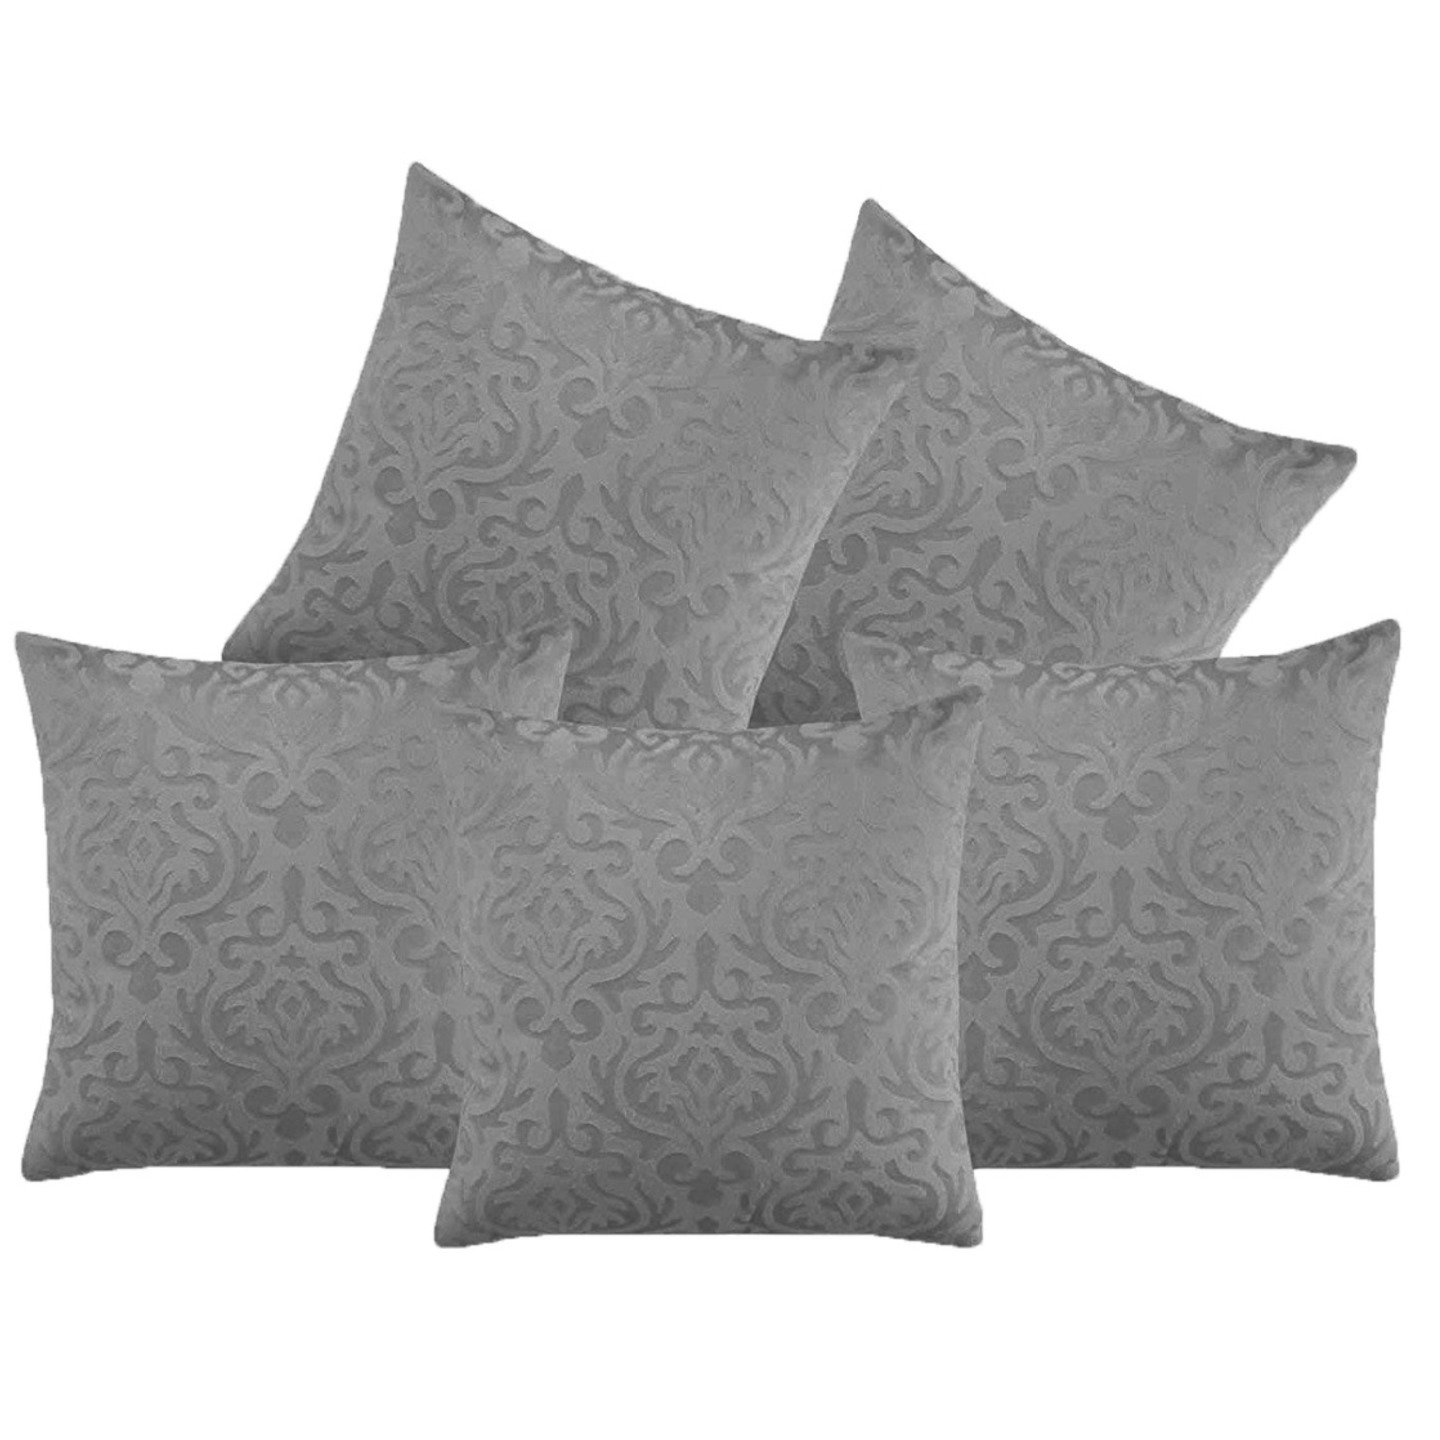 Handtex Home Velvet Cushion Covers 40.64x40.64 cm16x16 inches, - Set of 5  Grey